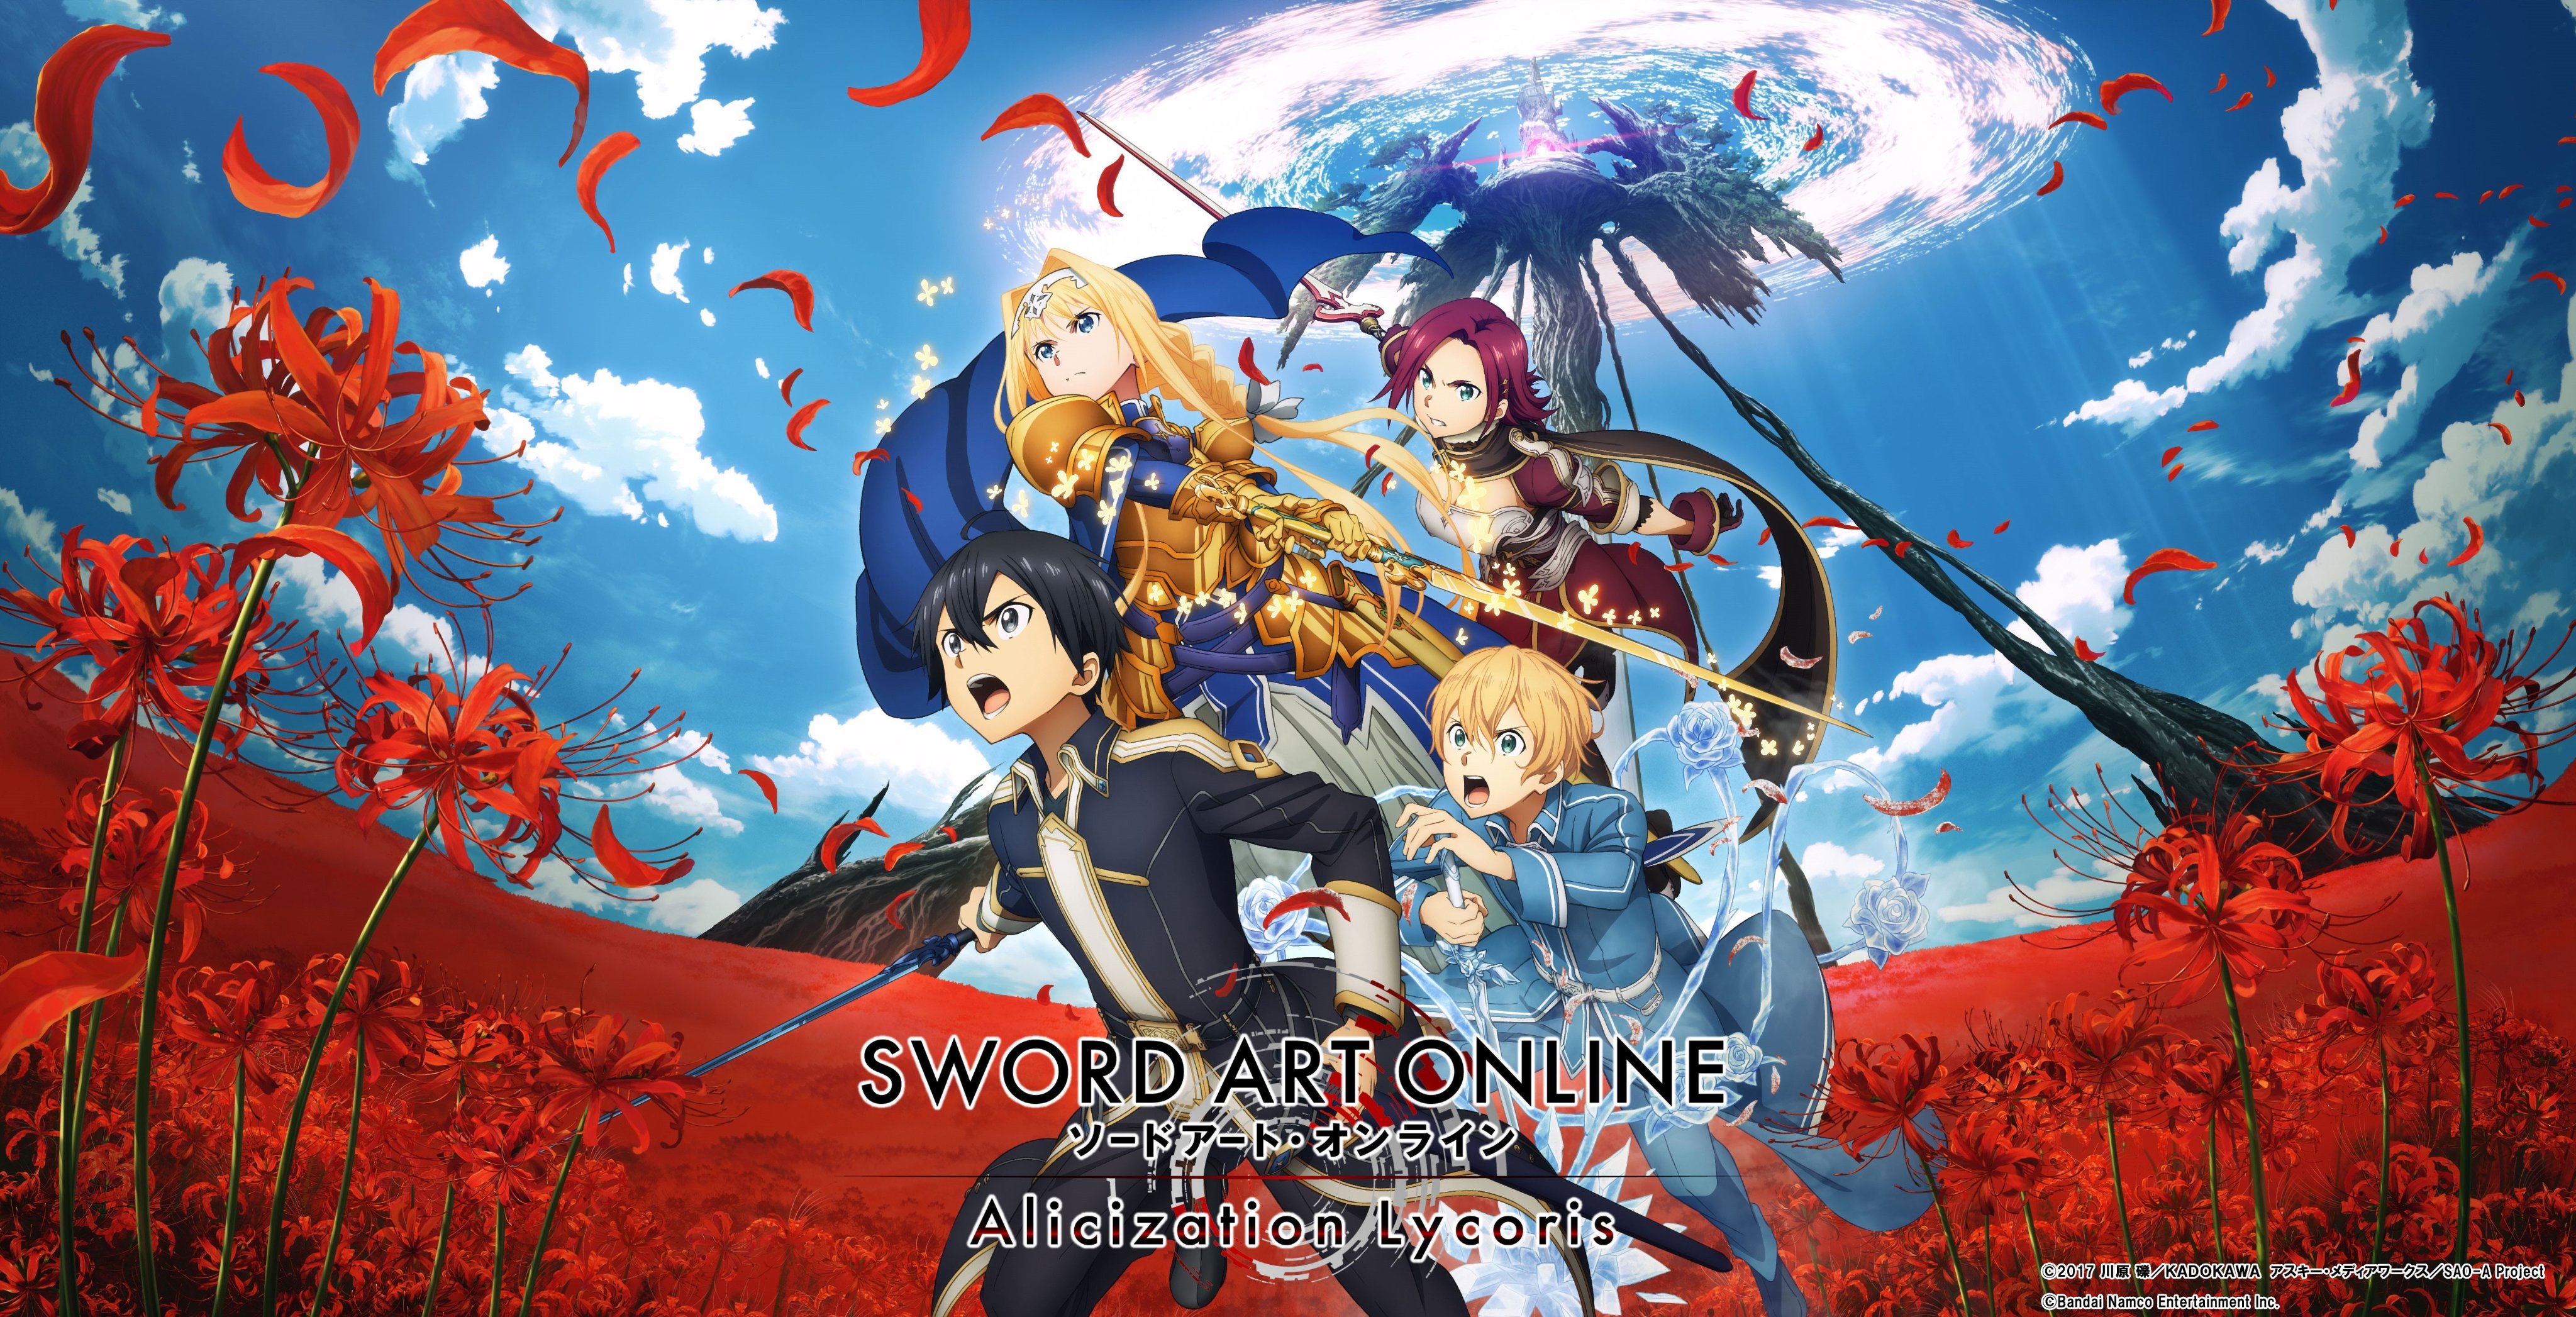 Sword Art Online: Alicization Lycoris confirmed for Switch